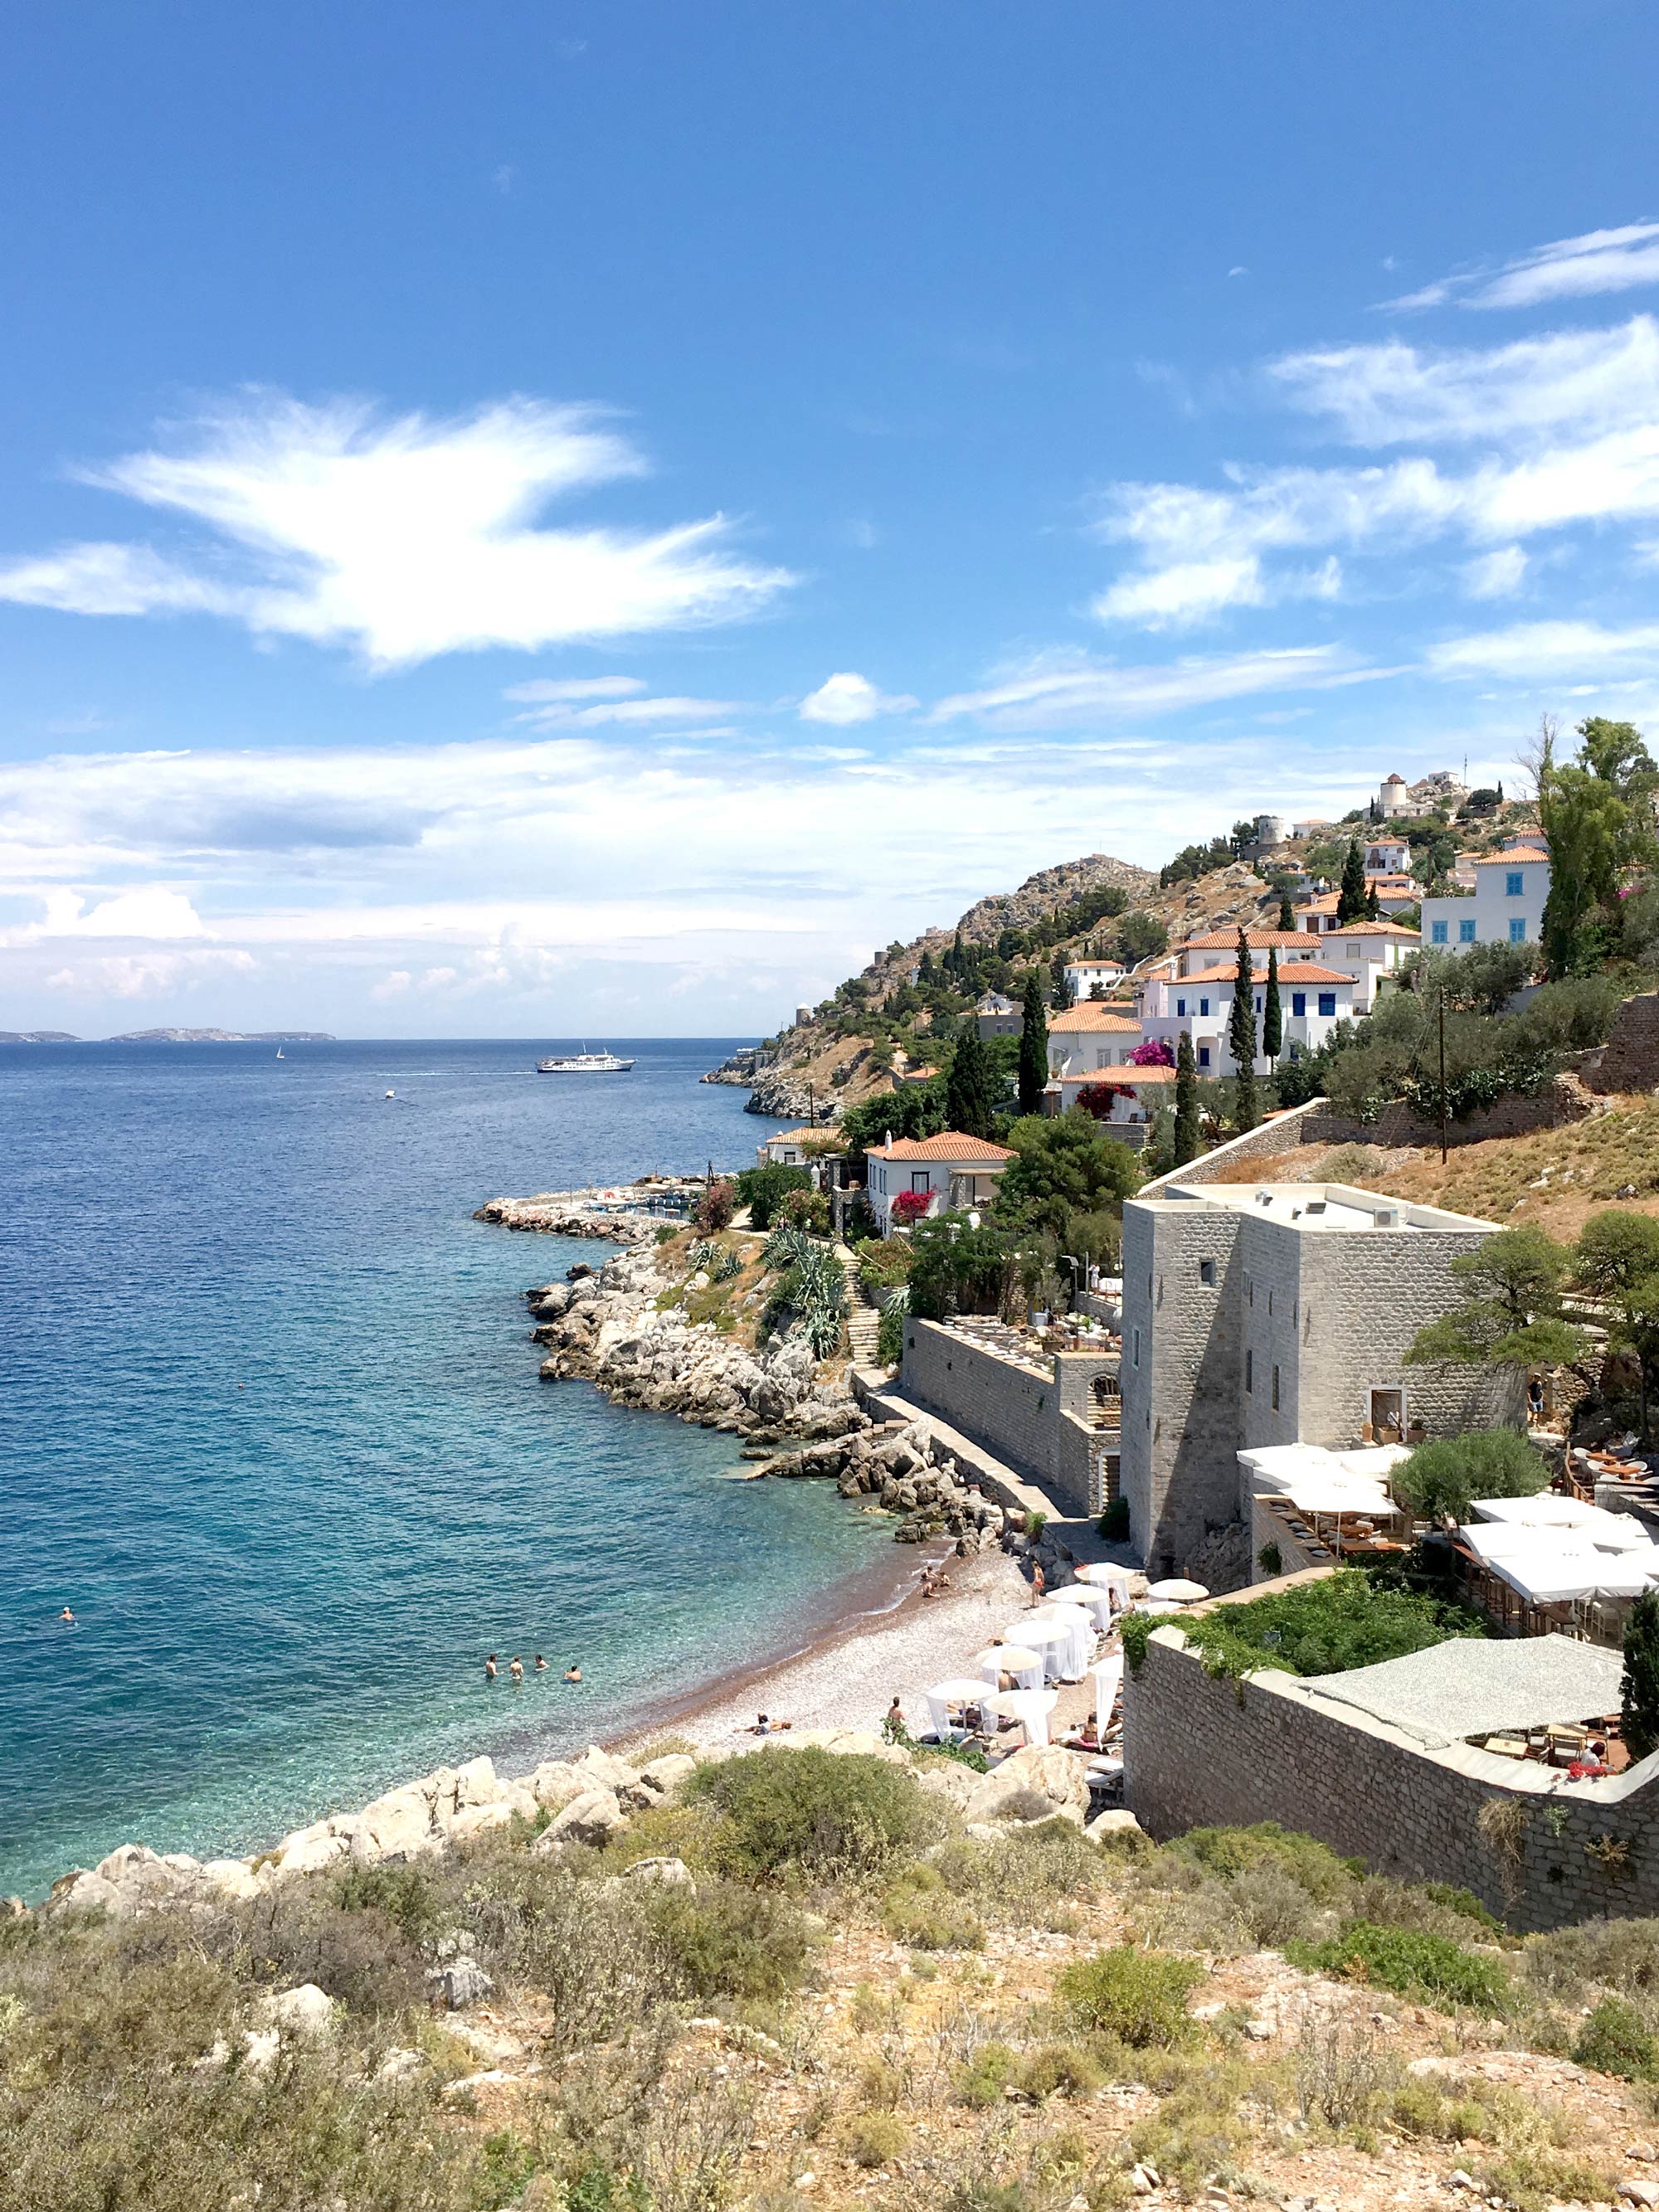 Hydra, Greece, the island that inspired our resort wear collection